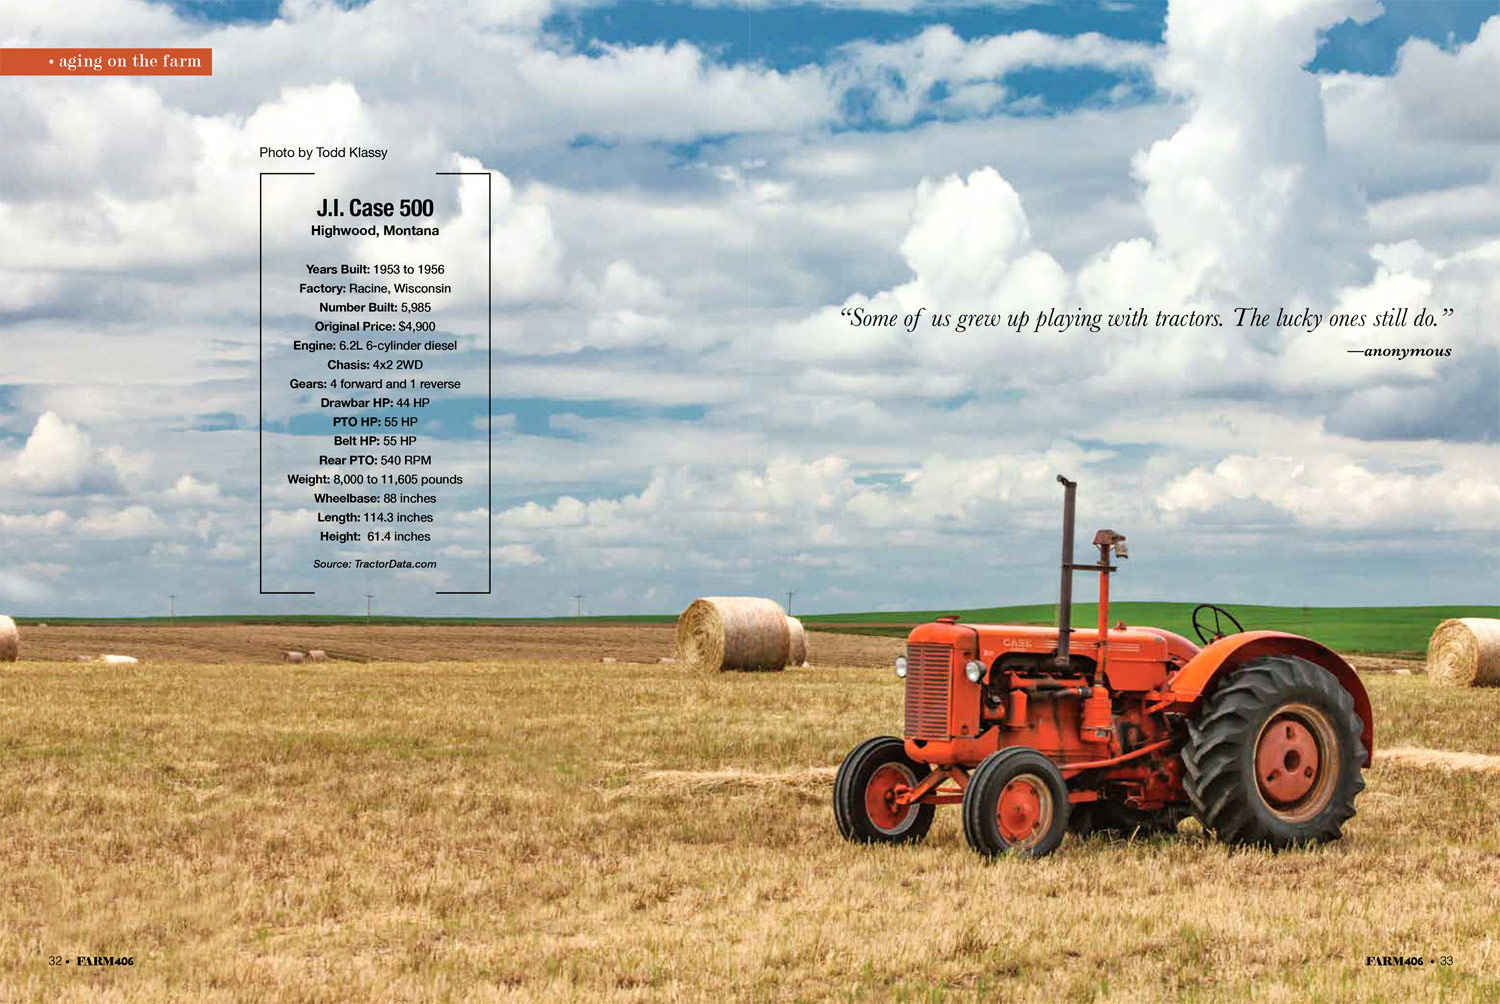 Old Case farm equipment photo featured in Montana agriculture magazine